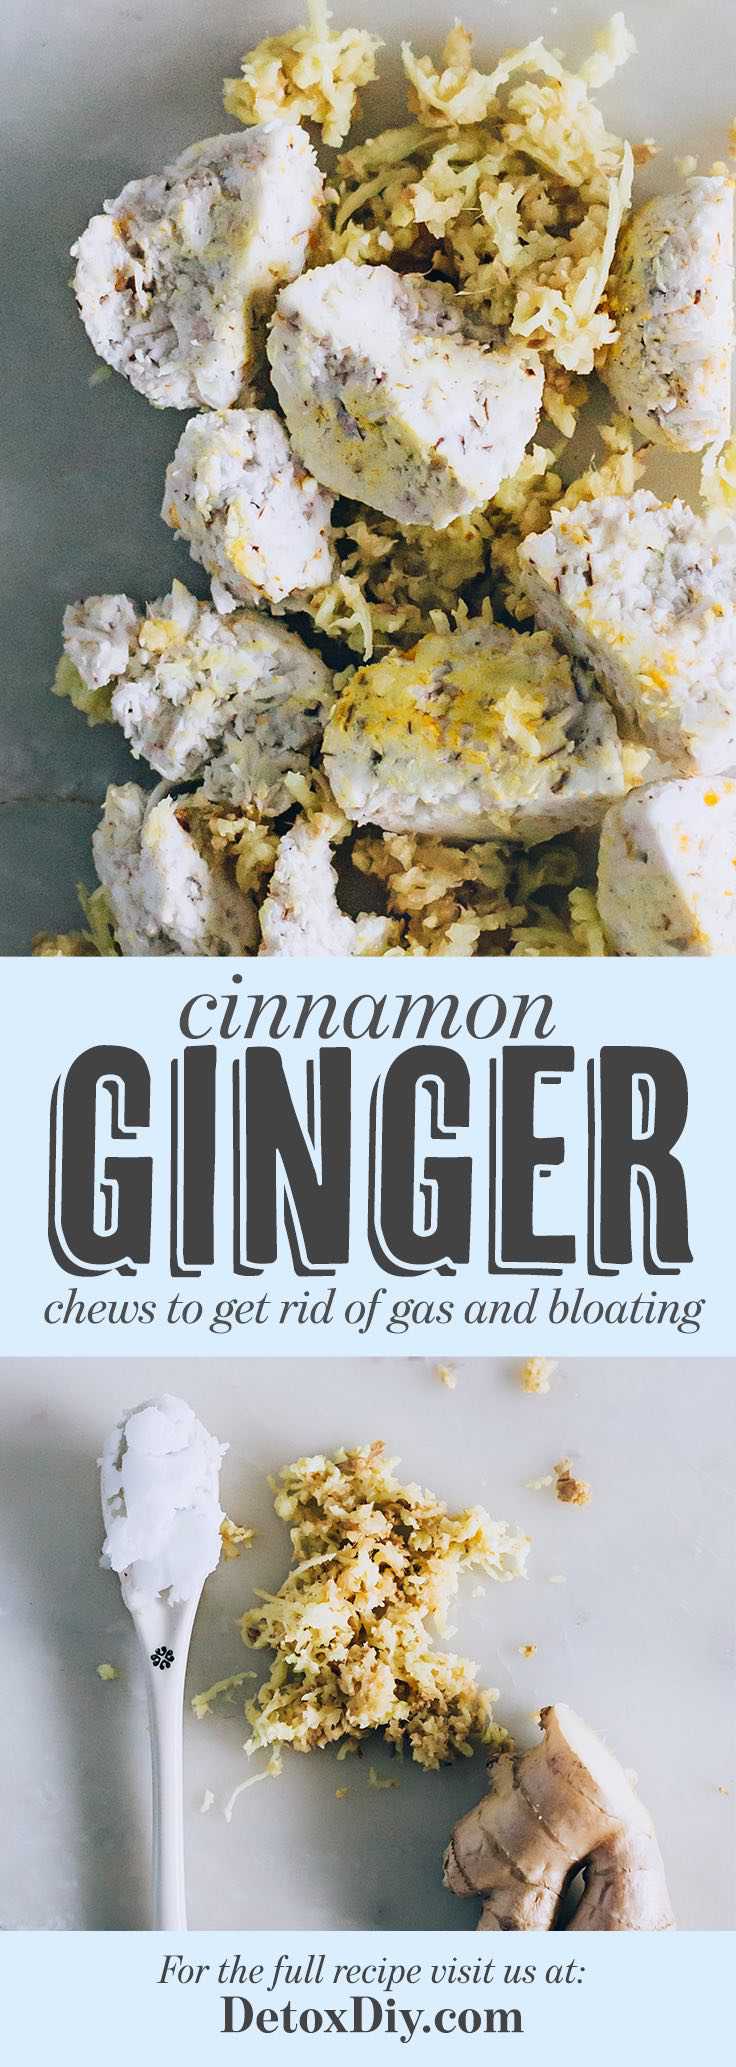 Homemade Ginger Chews to Get Rid of Gas, Bloating and Nausea